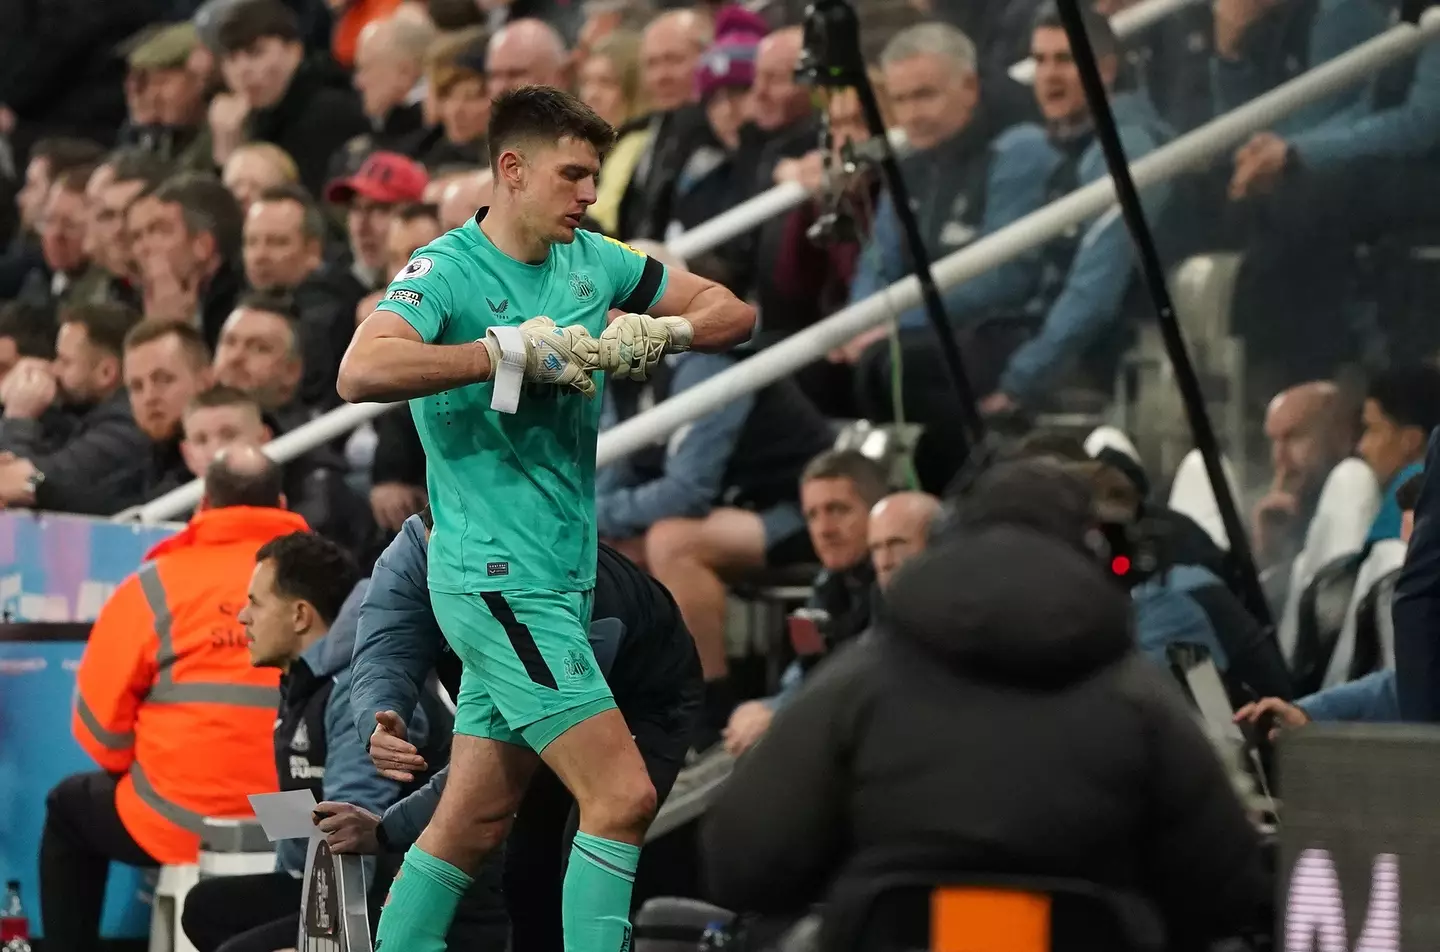 Nick Pope will miss the final through suspension. (PA Images)